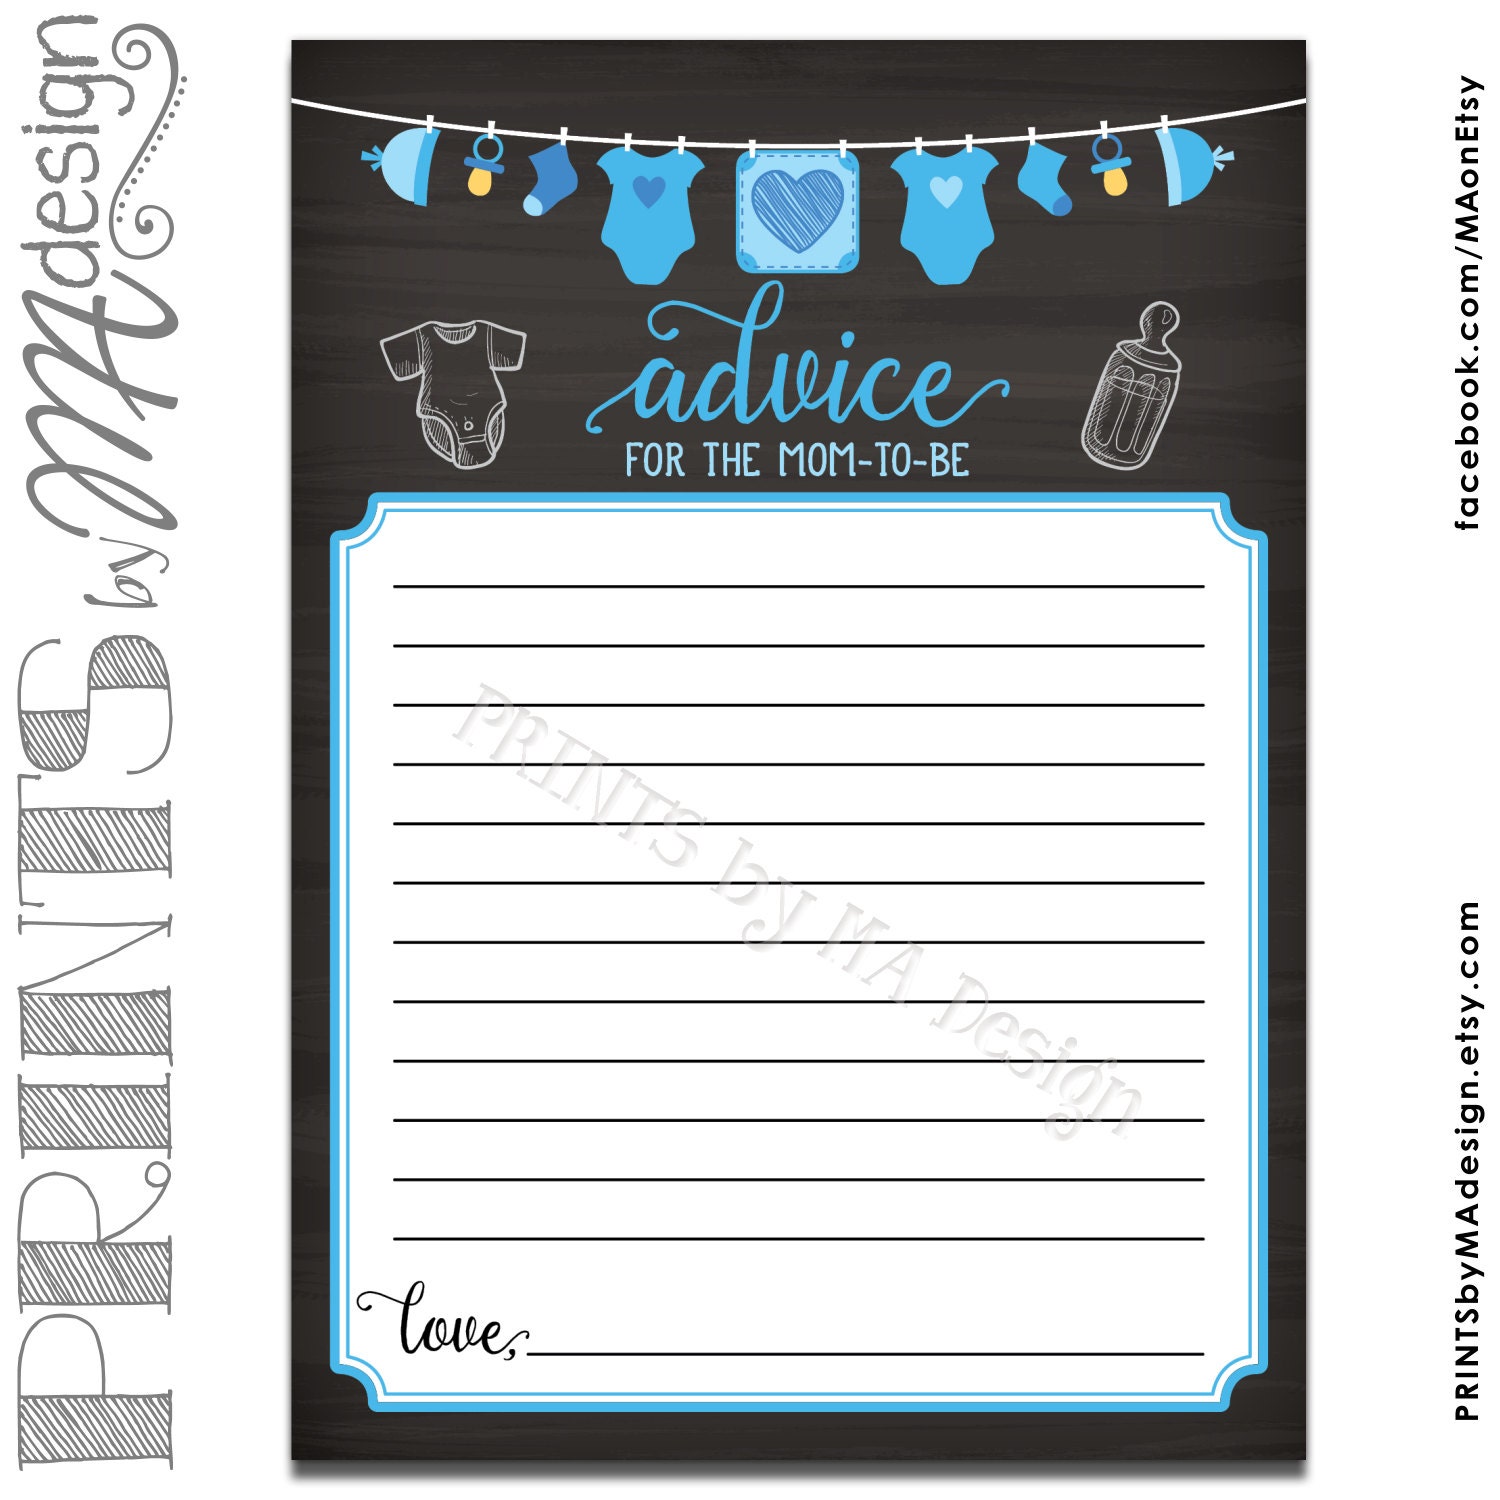 free-gender-neutral-advice-for-mommy-printables-in-2-sizes-i-spy